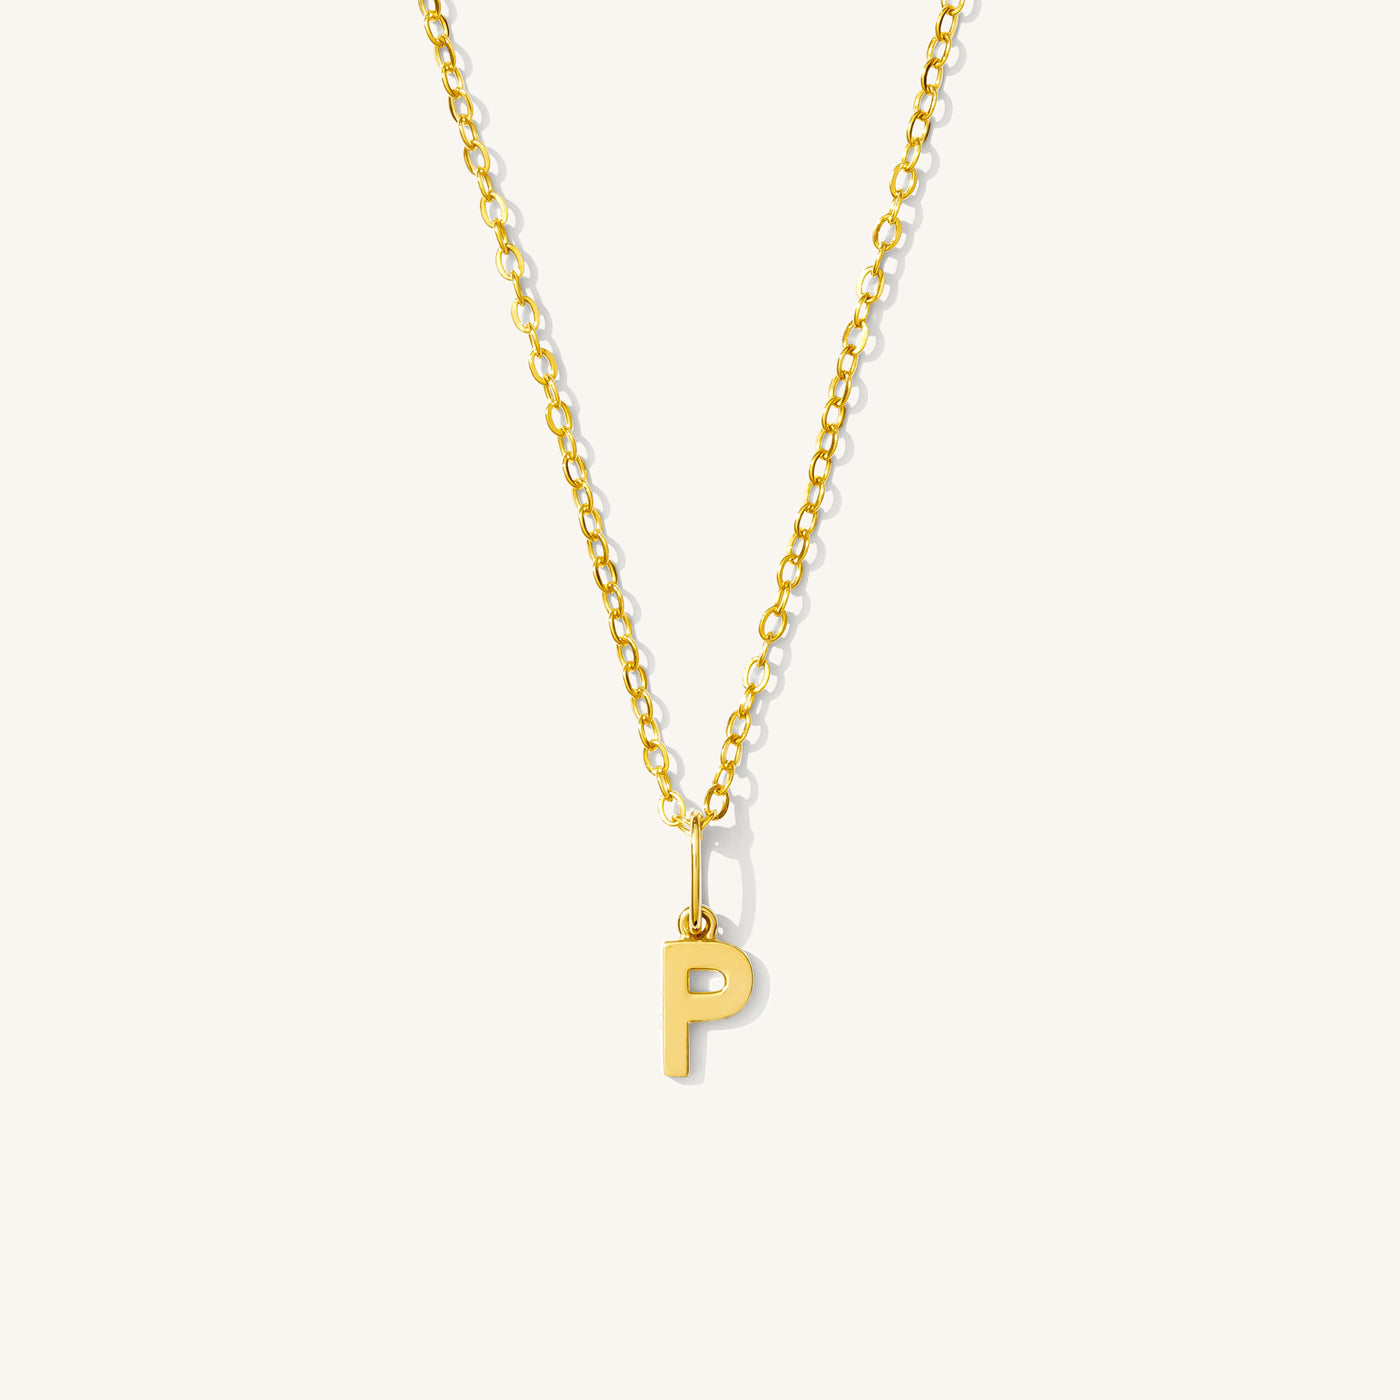 P Tiny Hanging Initial Necklace